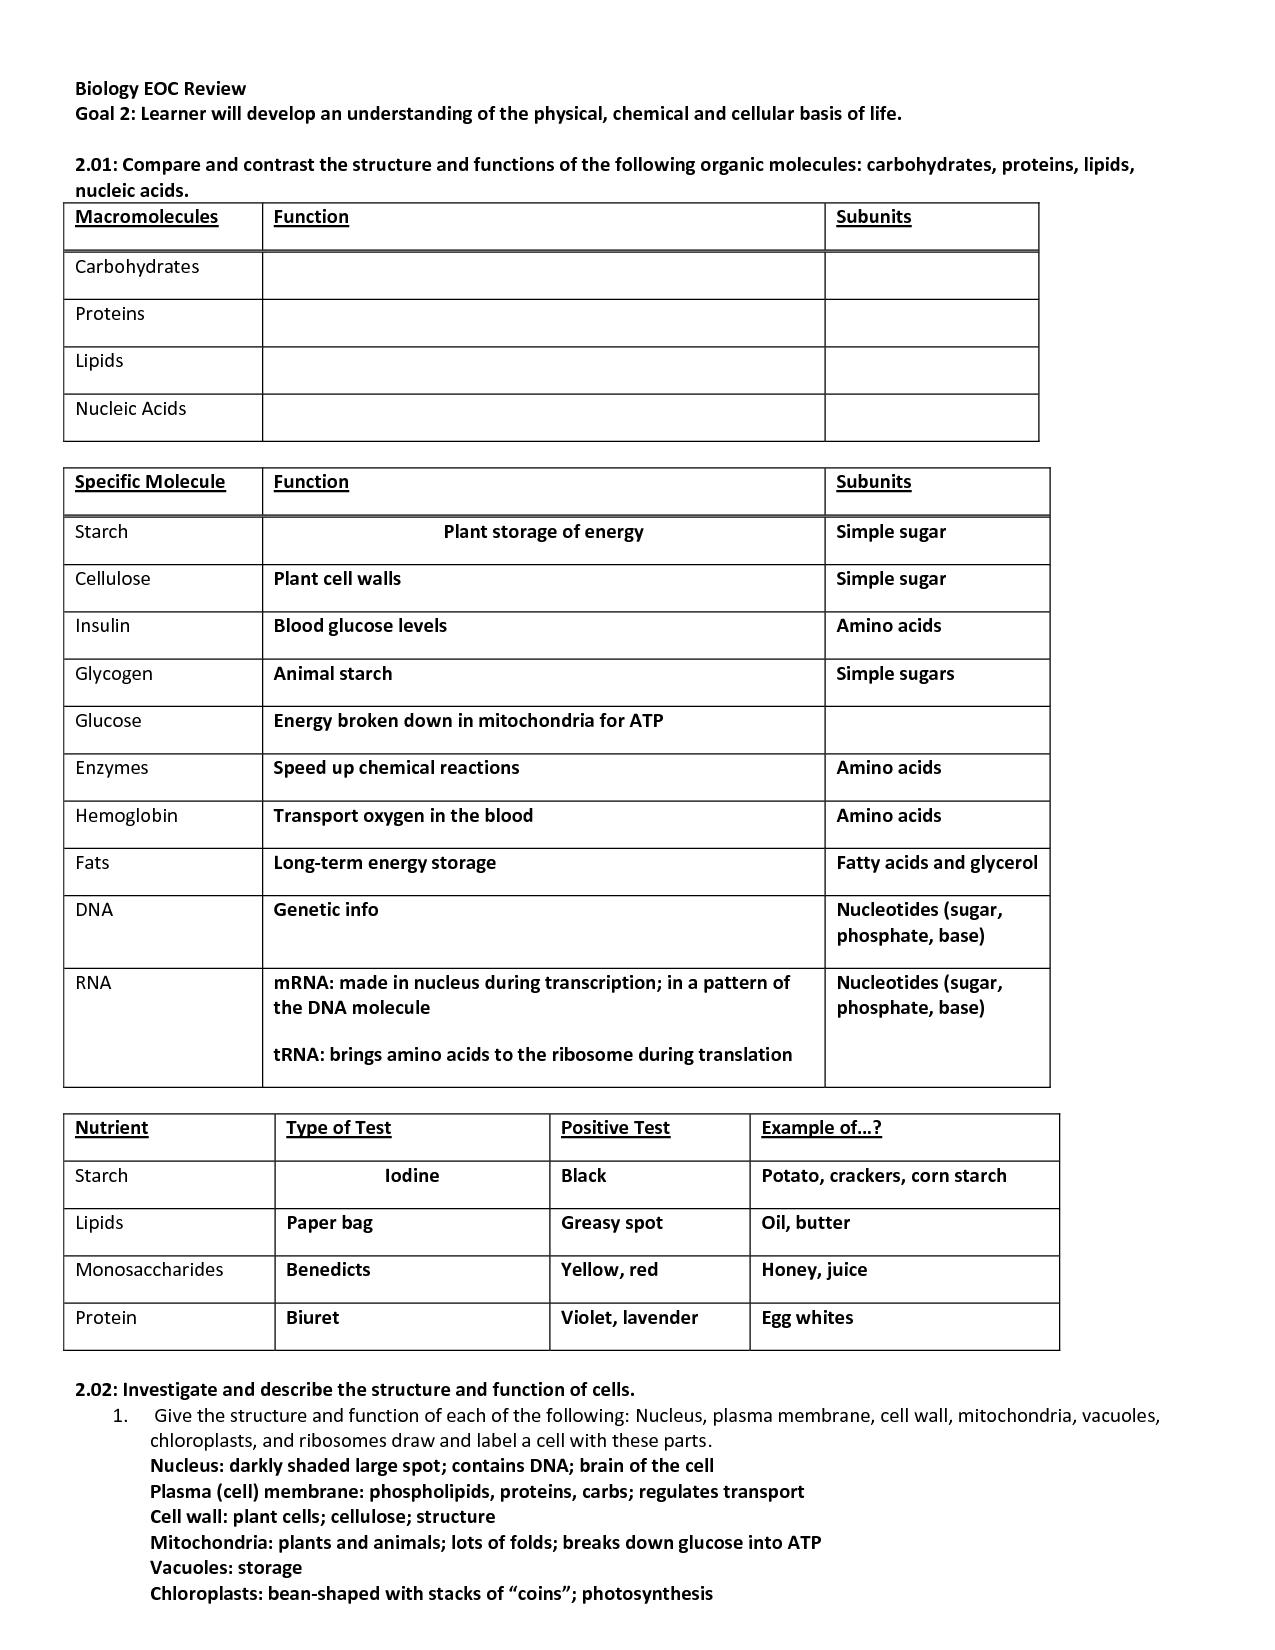 Biology Macromolecules Worksheets and Answers